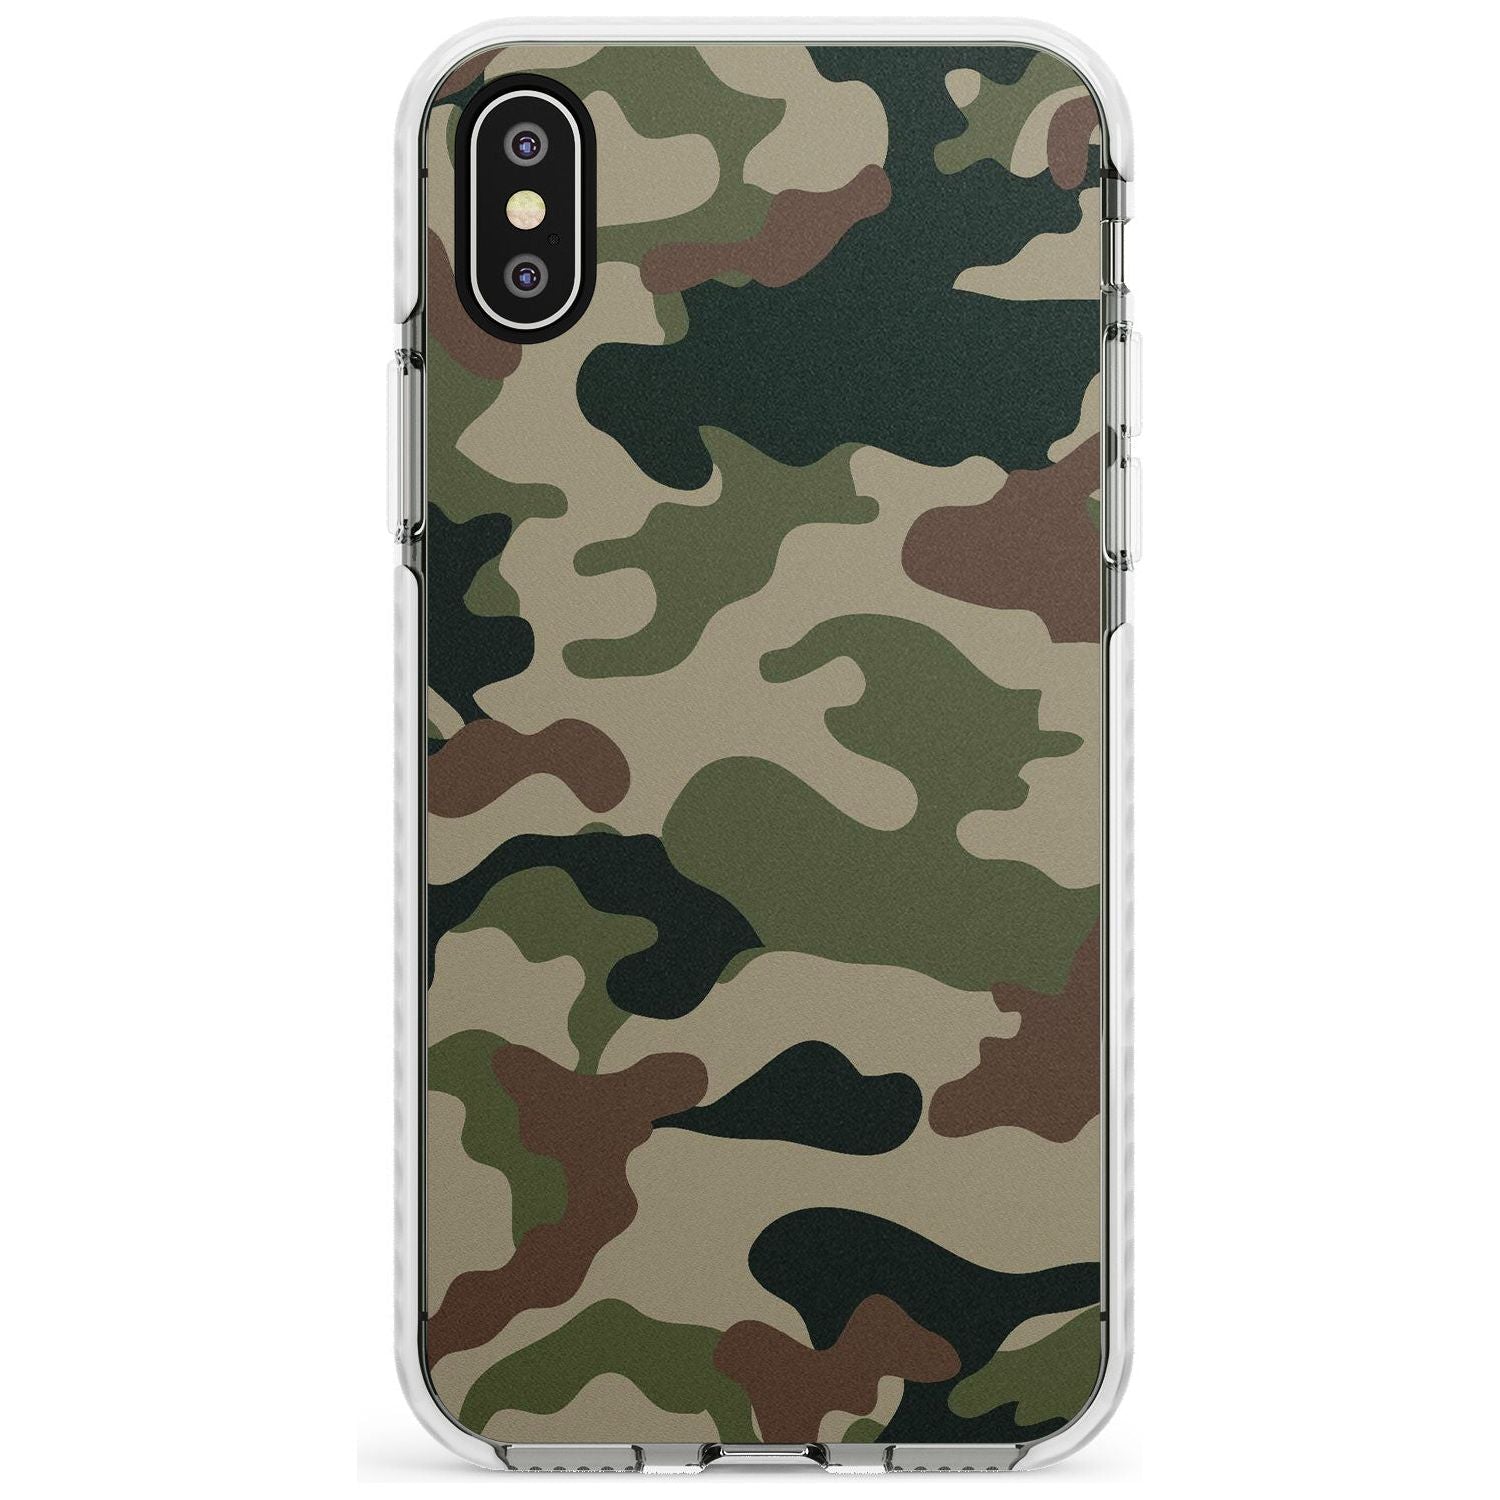 Green and Brown Camo Impact Phone Case for iPhone X XS Max XR